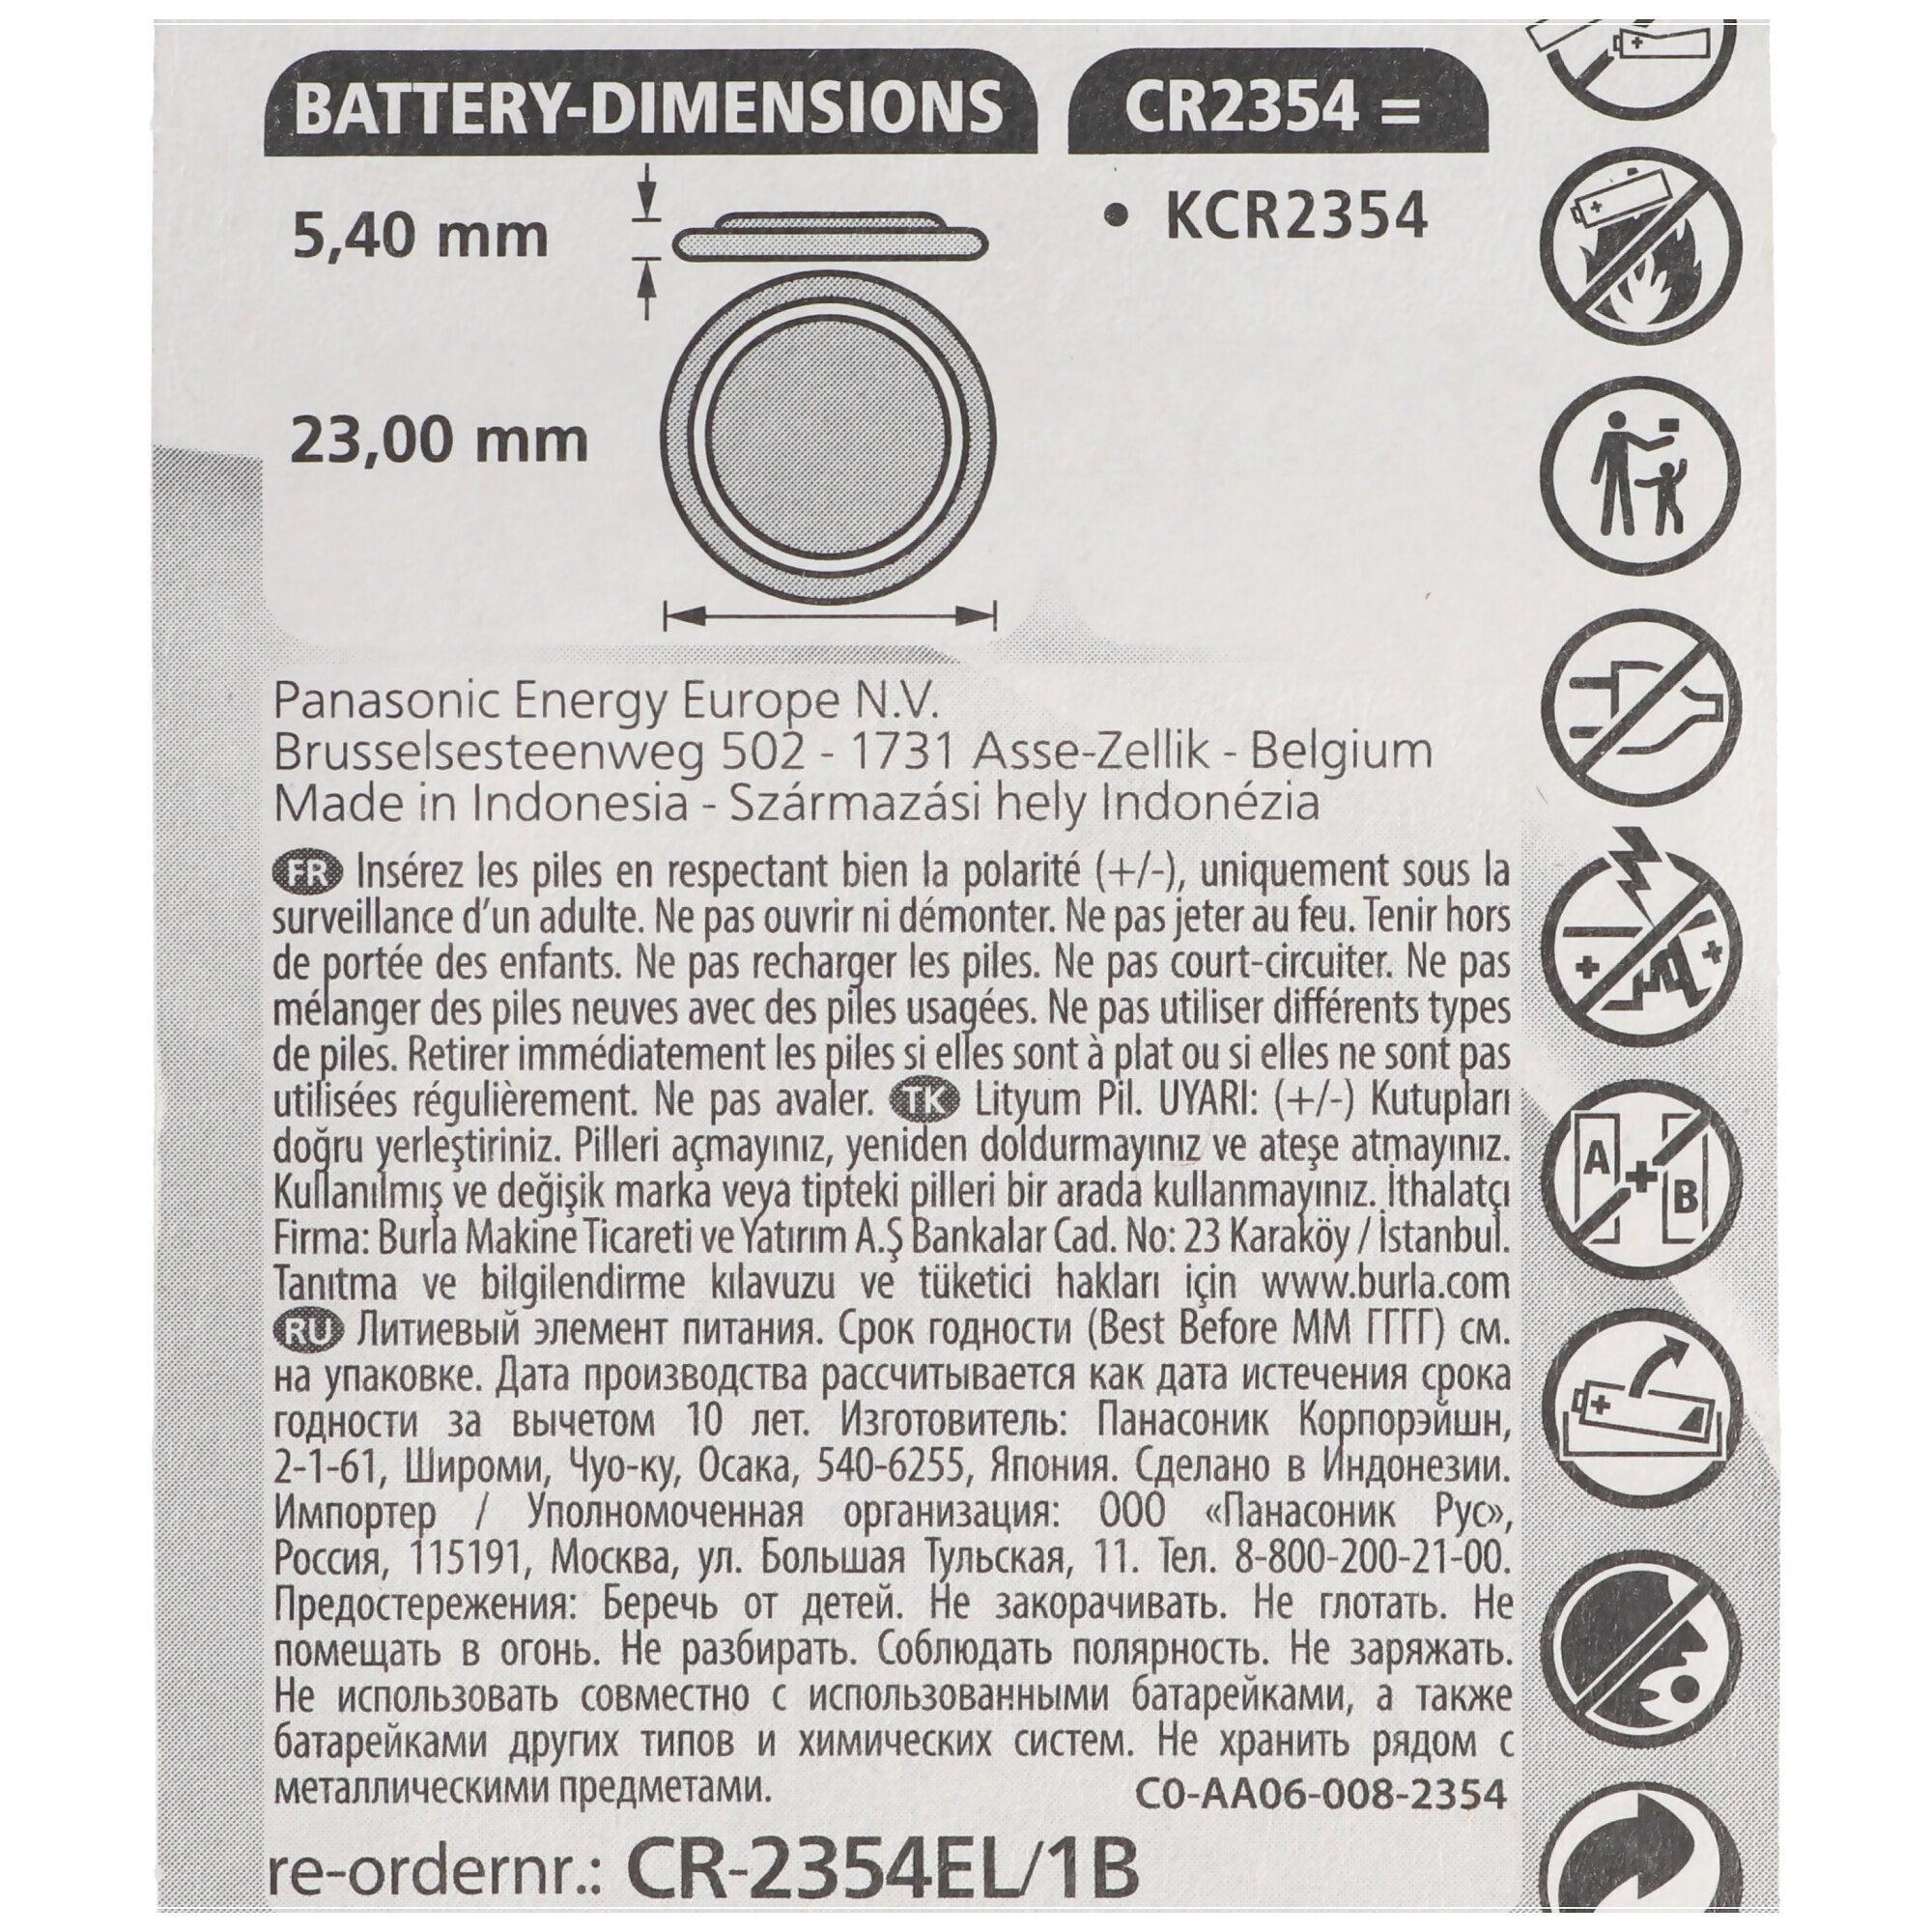 Panasonic CR2354 lithium battery with recess at the negative pole